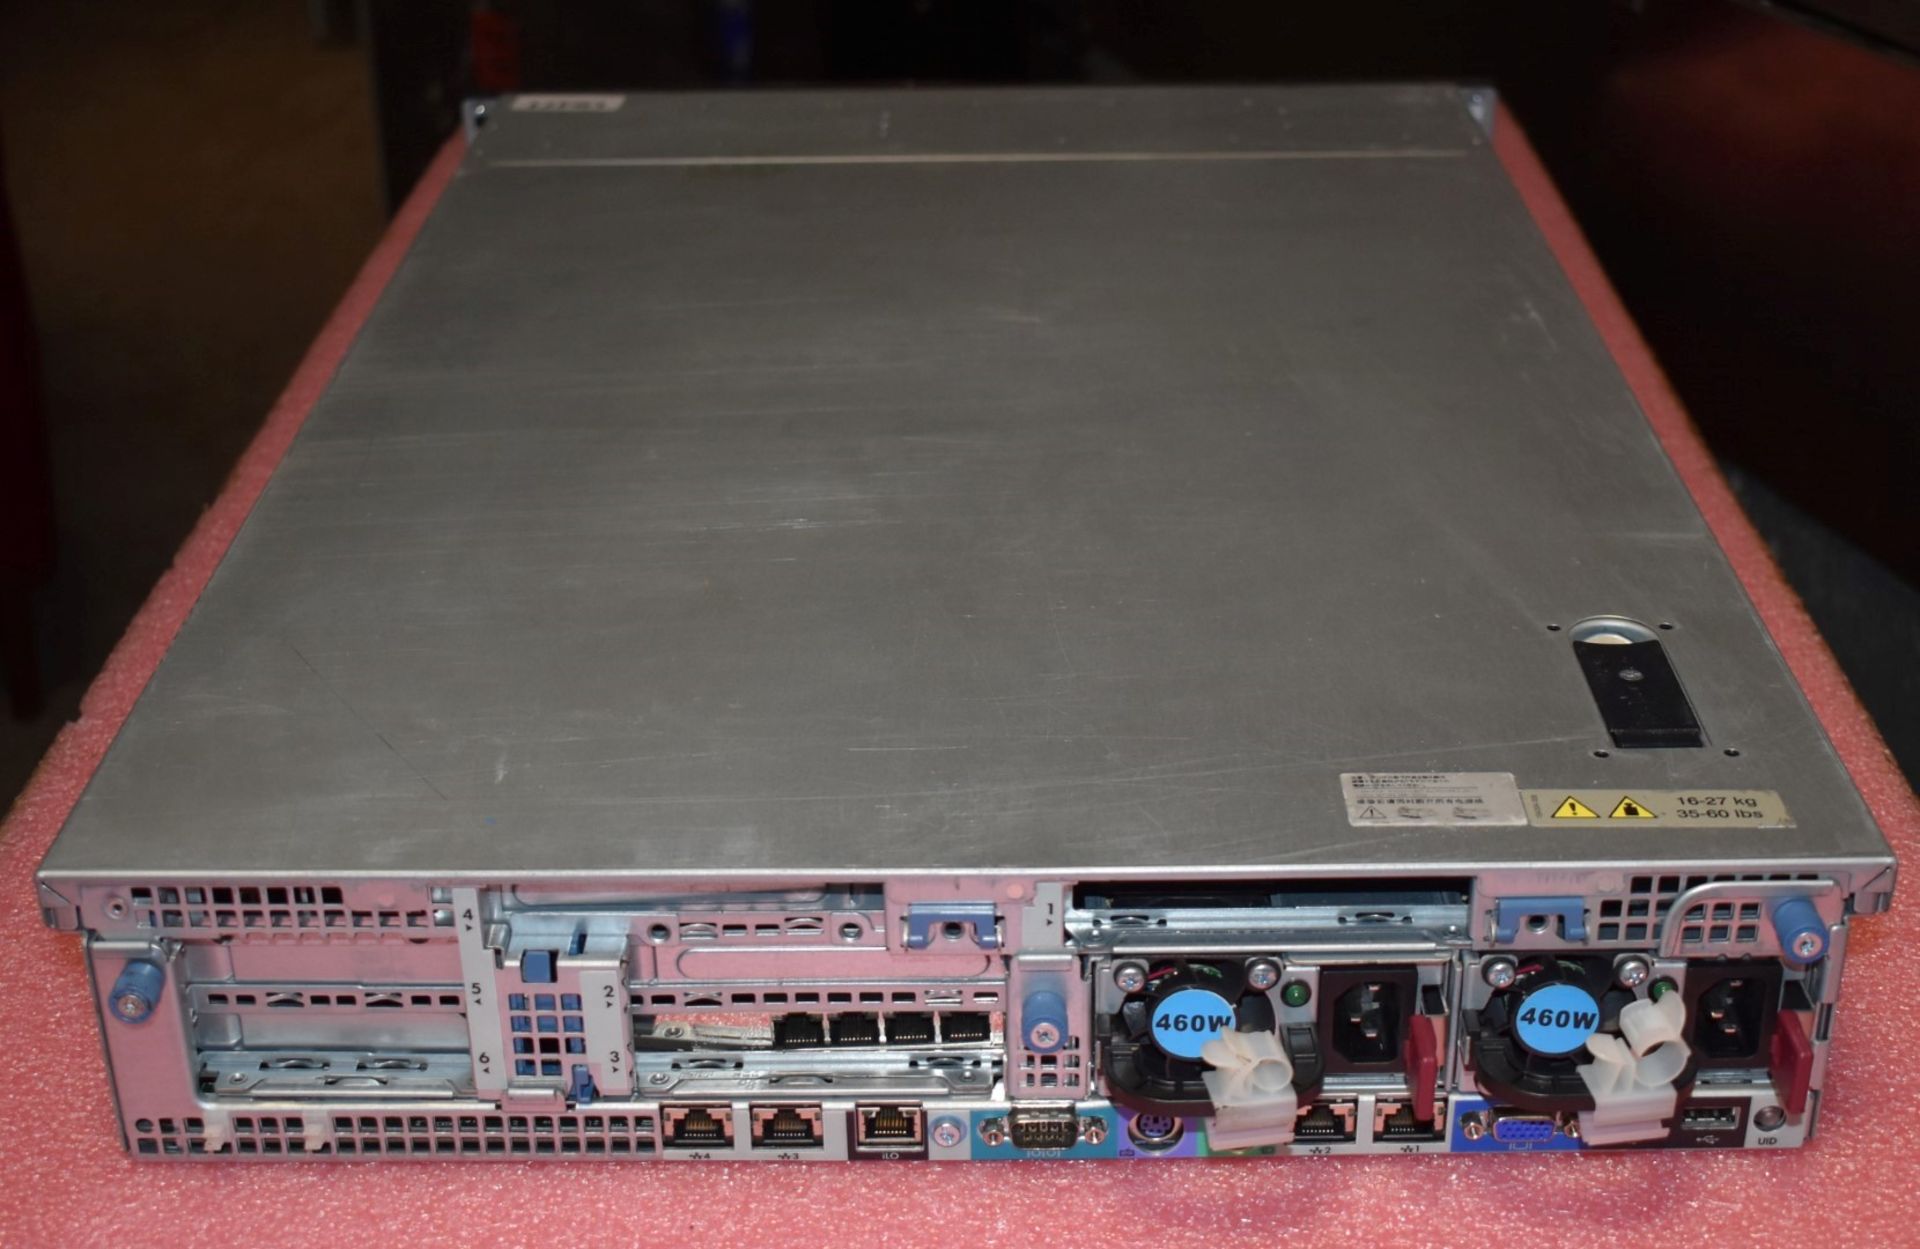 1 x HP ProLiant DL380 G7 Server With 2 x Intel Xeon X5650 Six Core 3.06ghz Processors and 92gb Ram - - Image 3 of 8